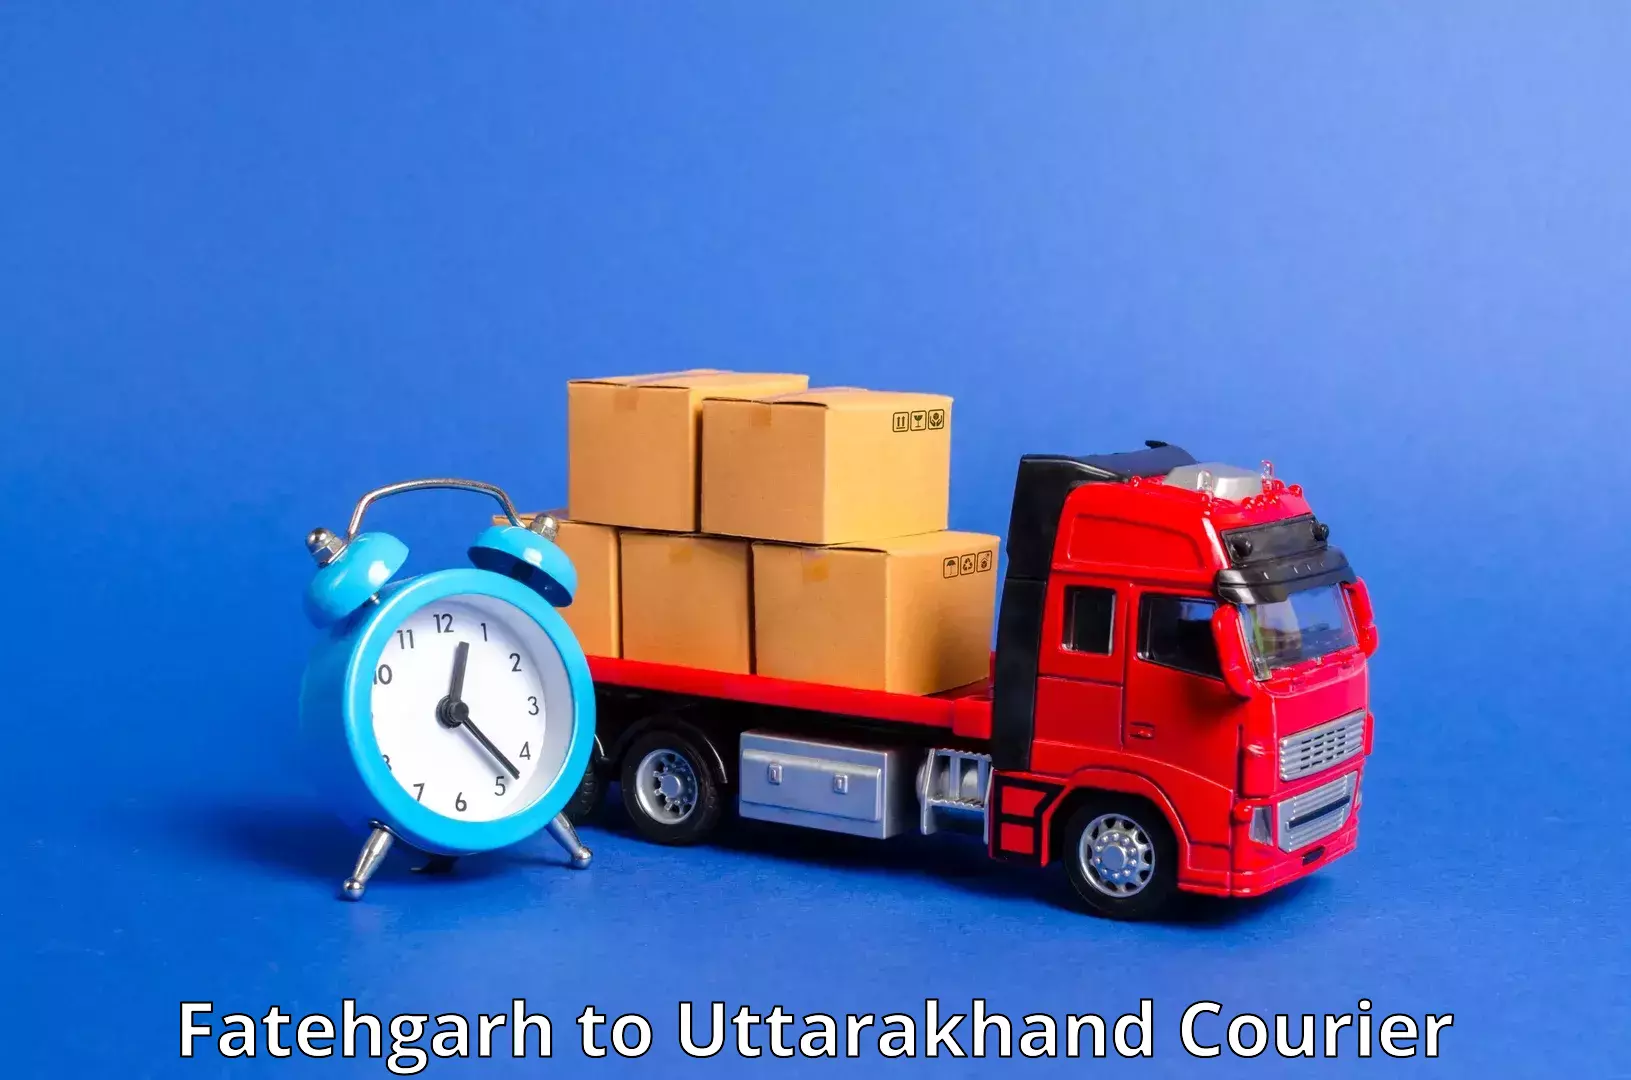 Affordable parcel rates Fatehgarh to Rudraprayag